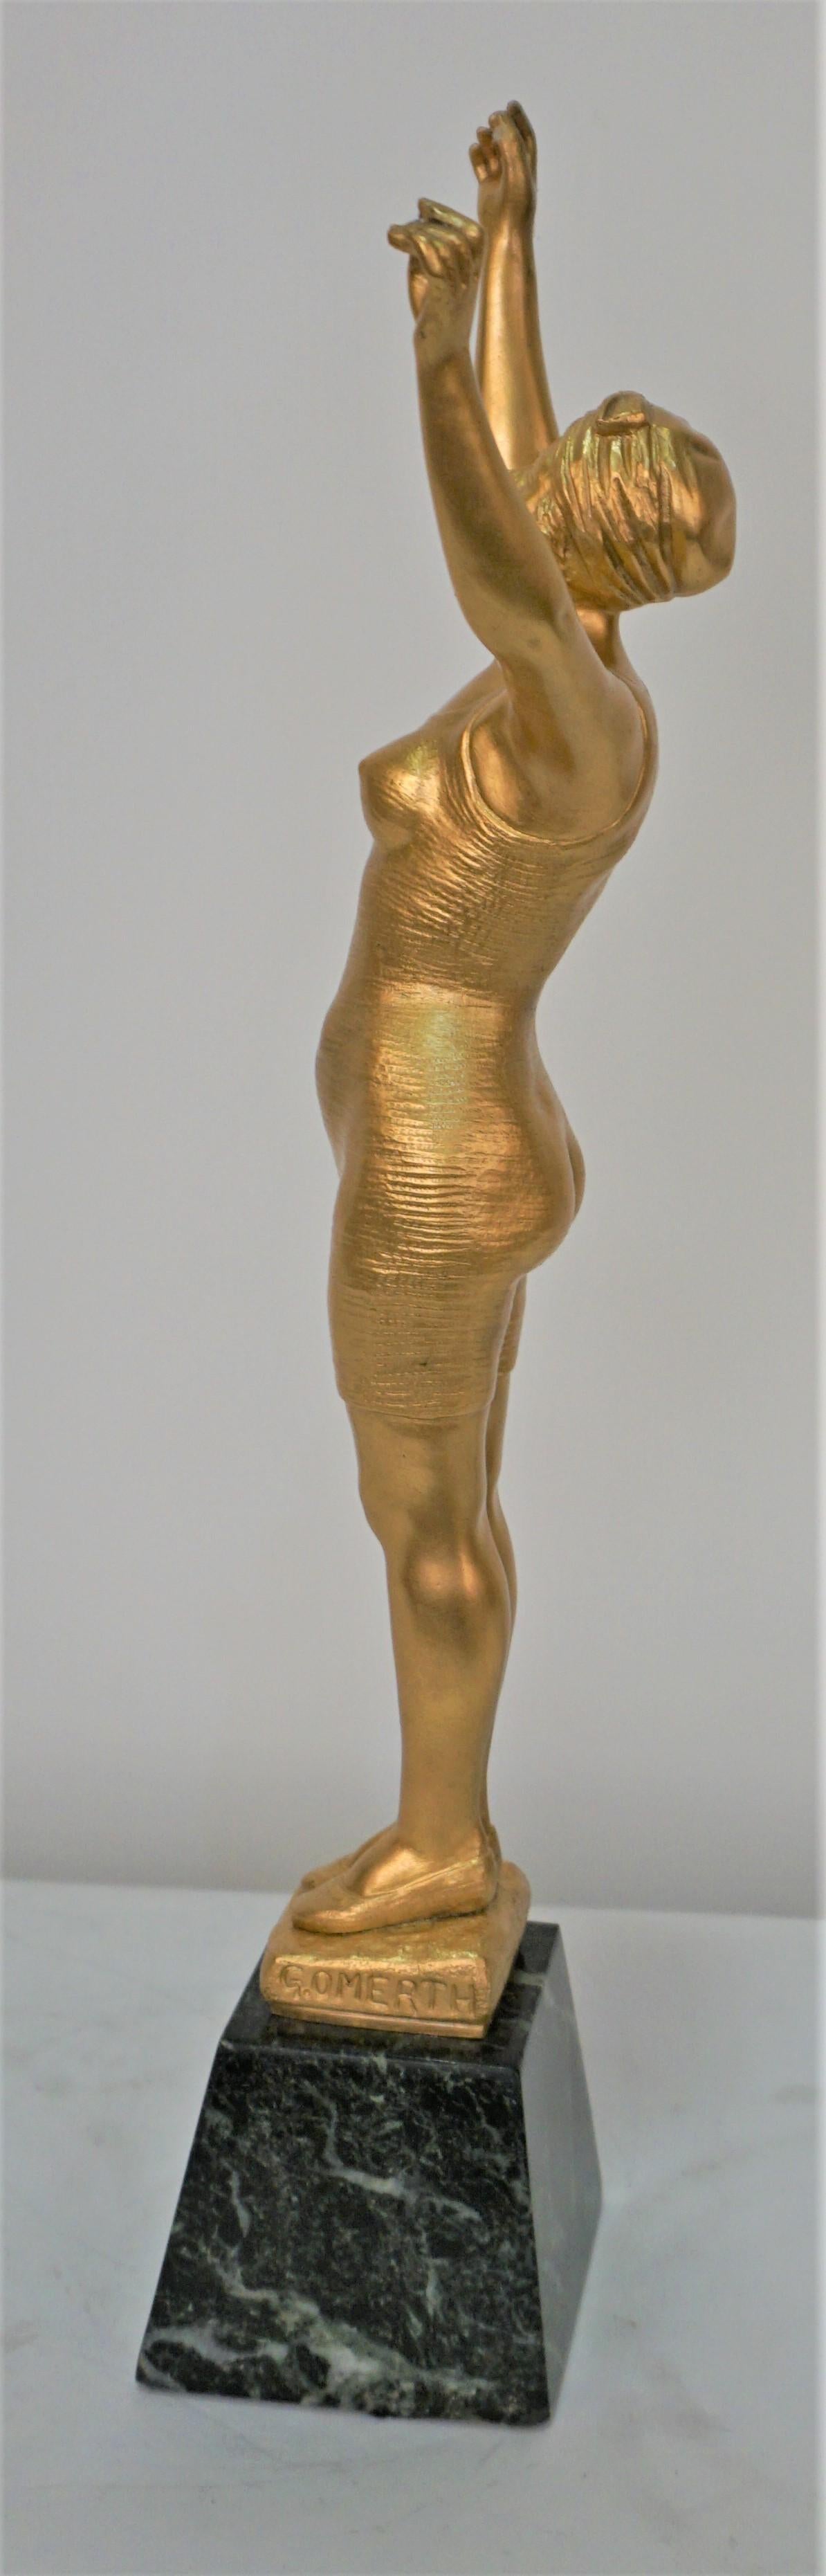 Dore bronze of a female figure in swimwear standing an marble by George Omerth.